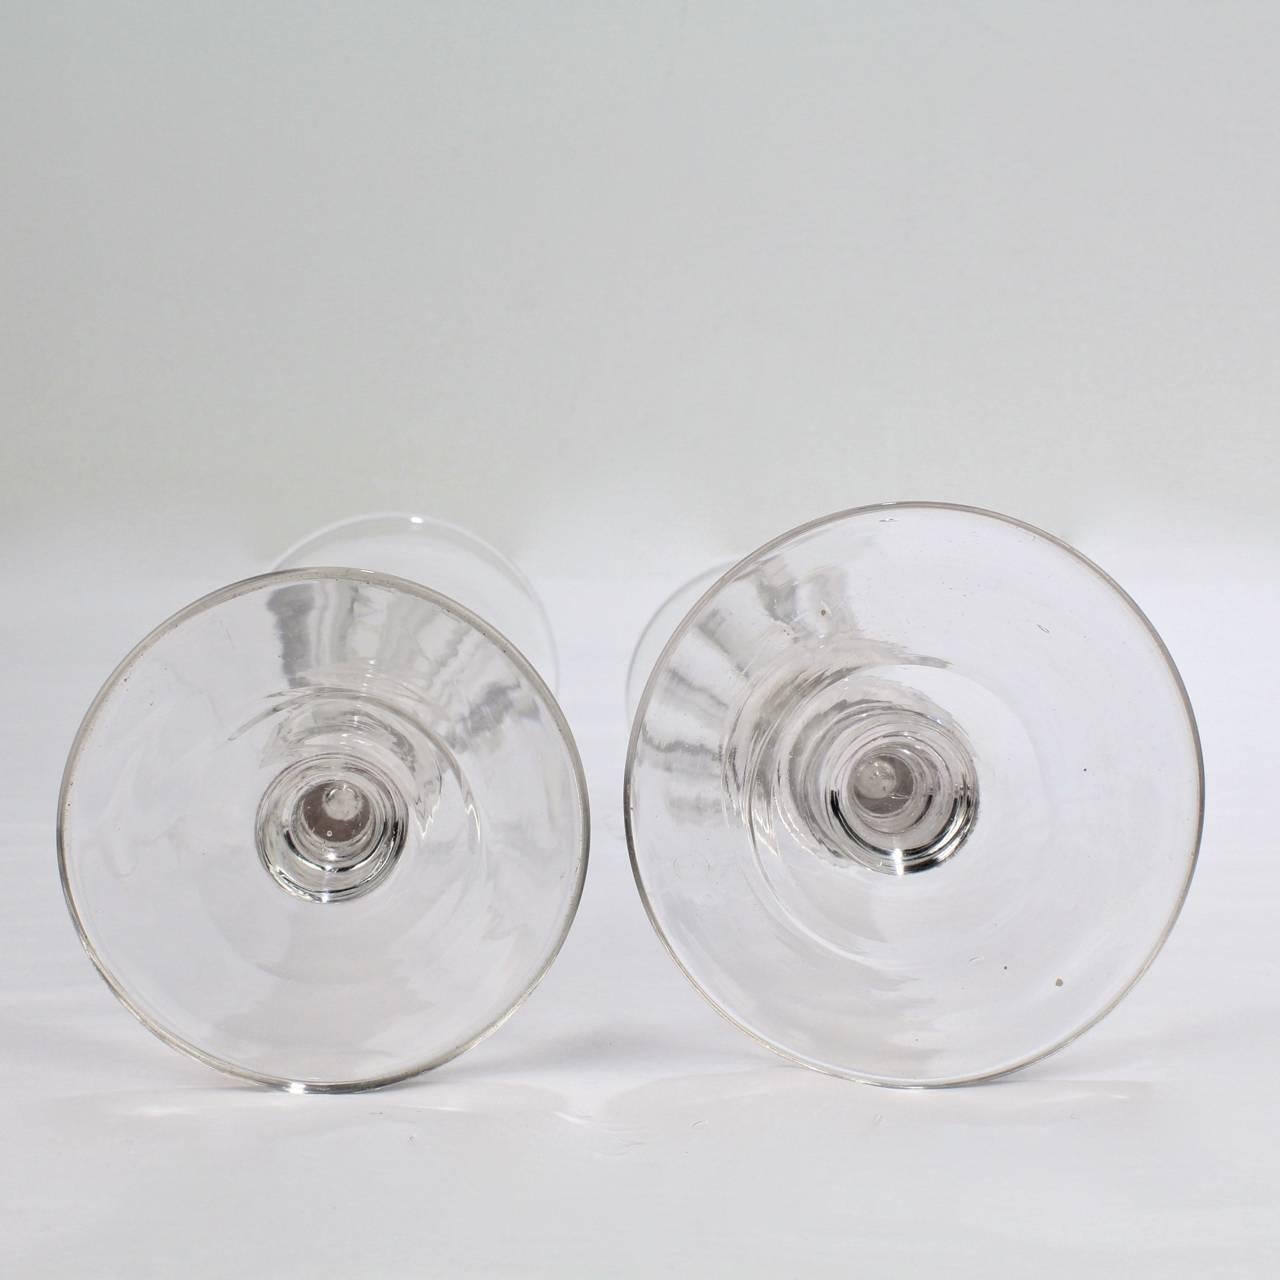 Blown Glass Pair of Antique Early 19th Century Regency Period Faceted Glass Champagne Flutes